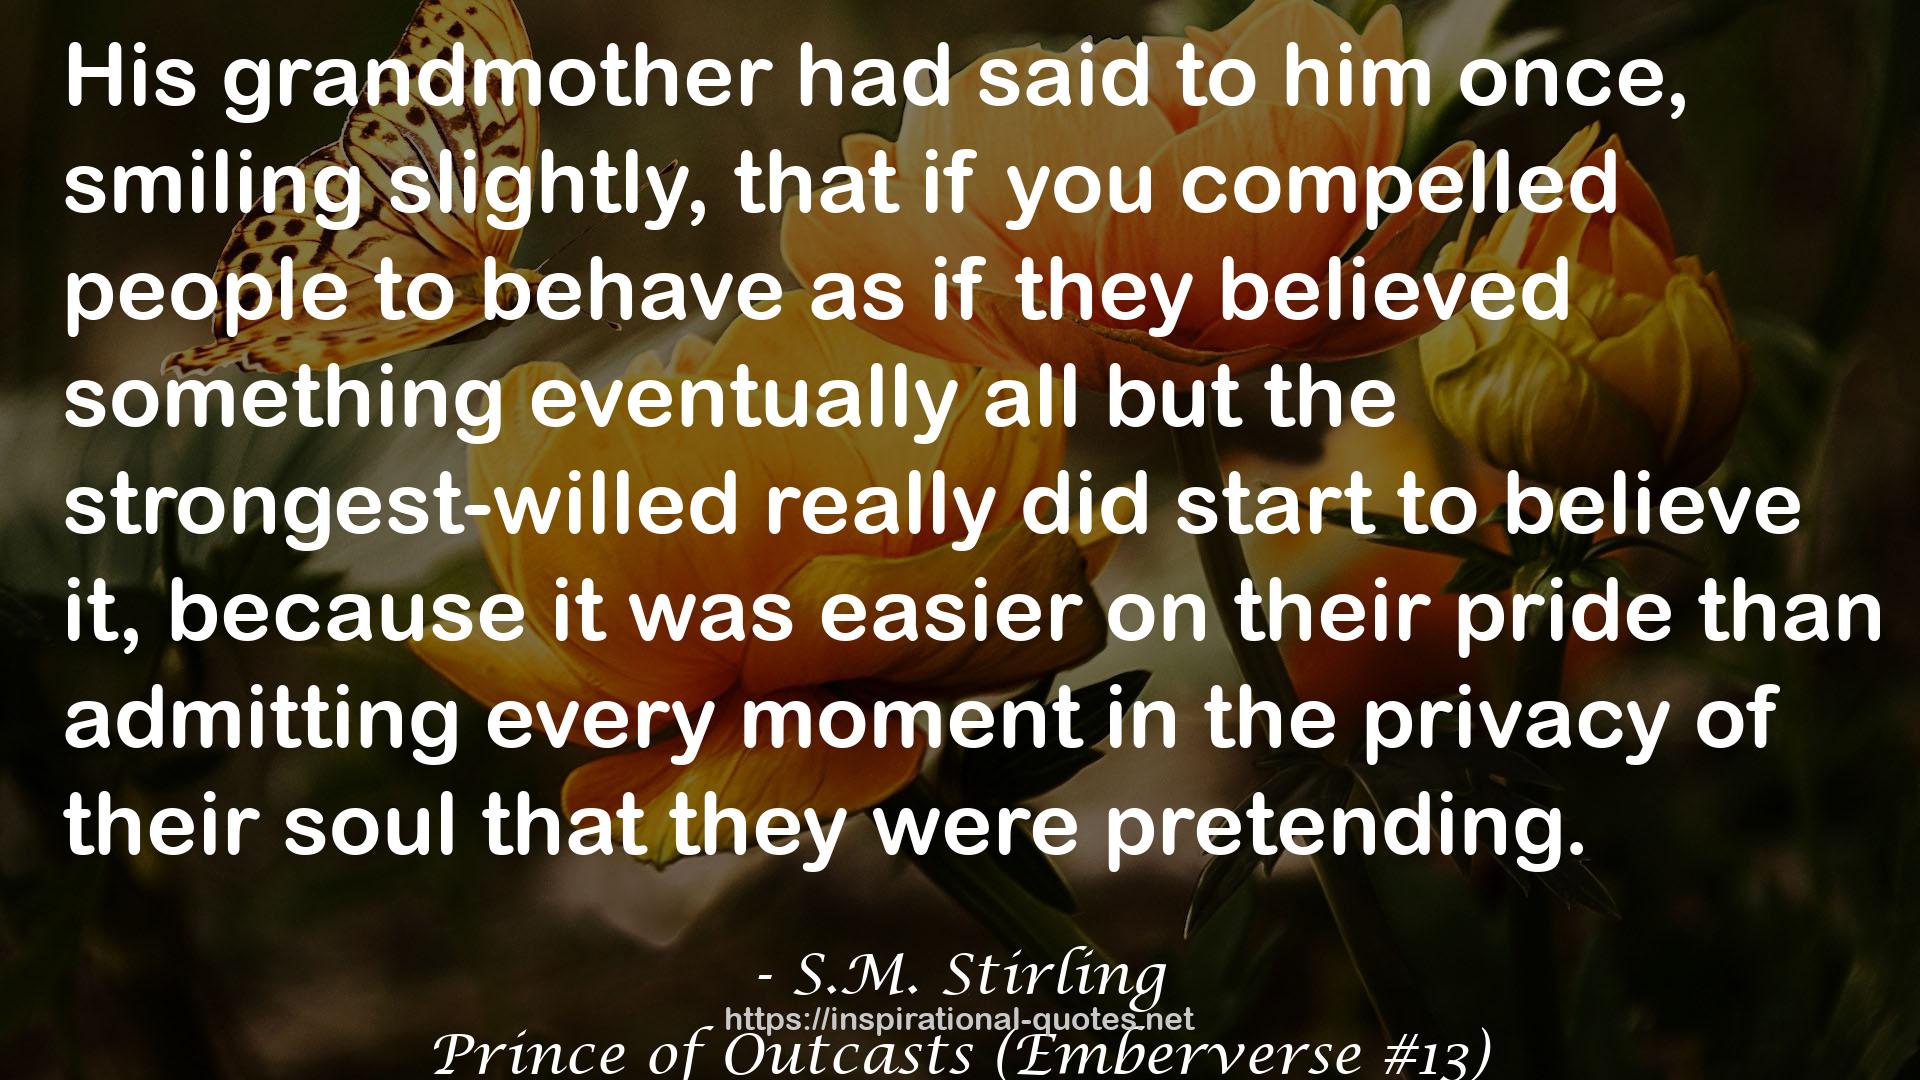 Prince of Outcasts (Emberverse #13) QUOTES